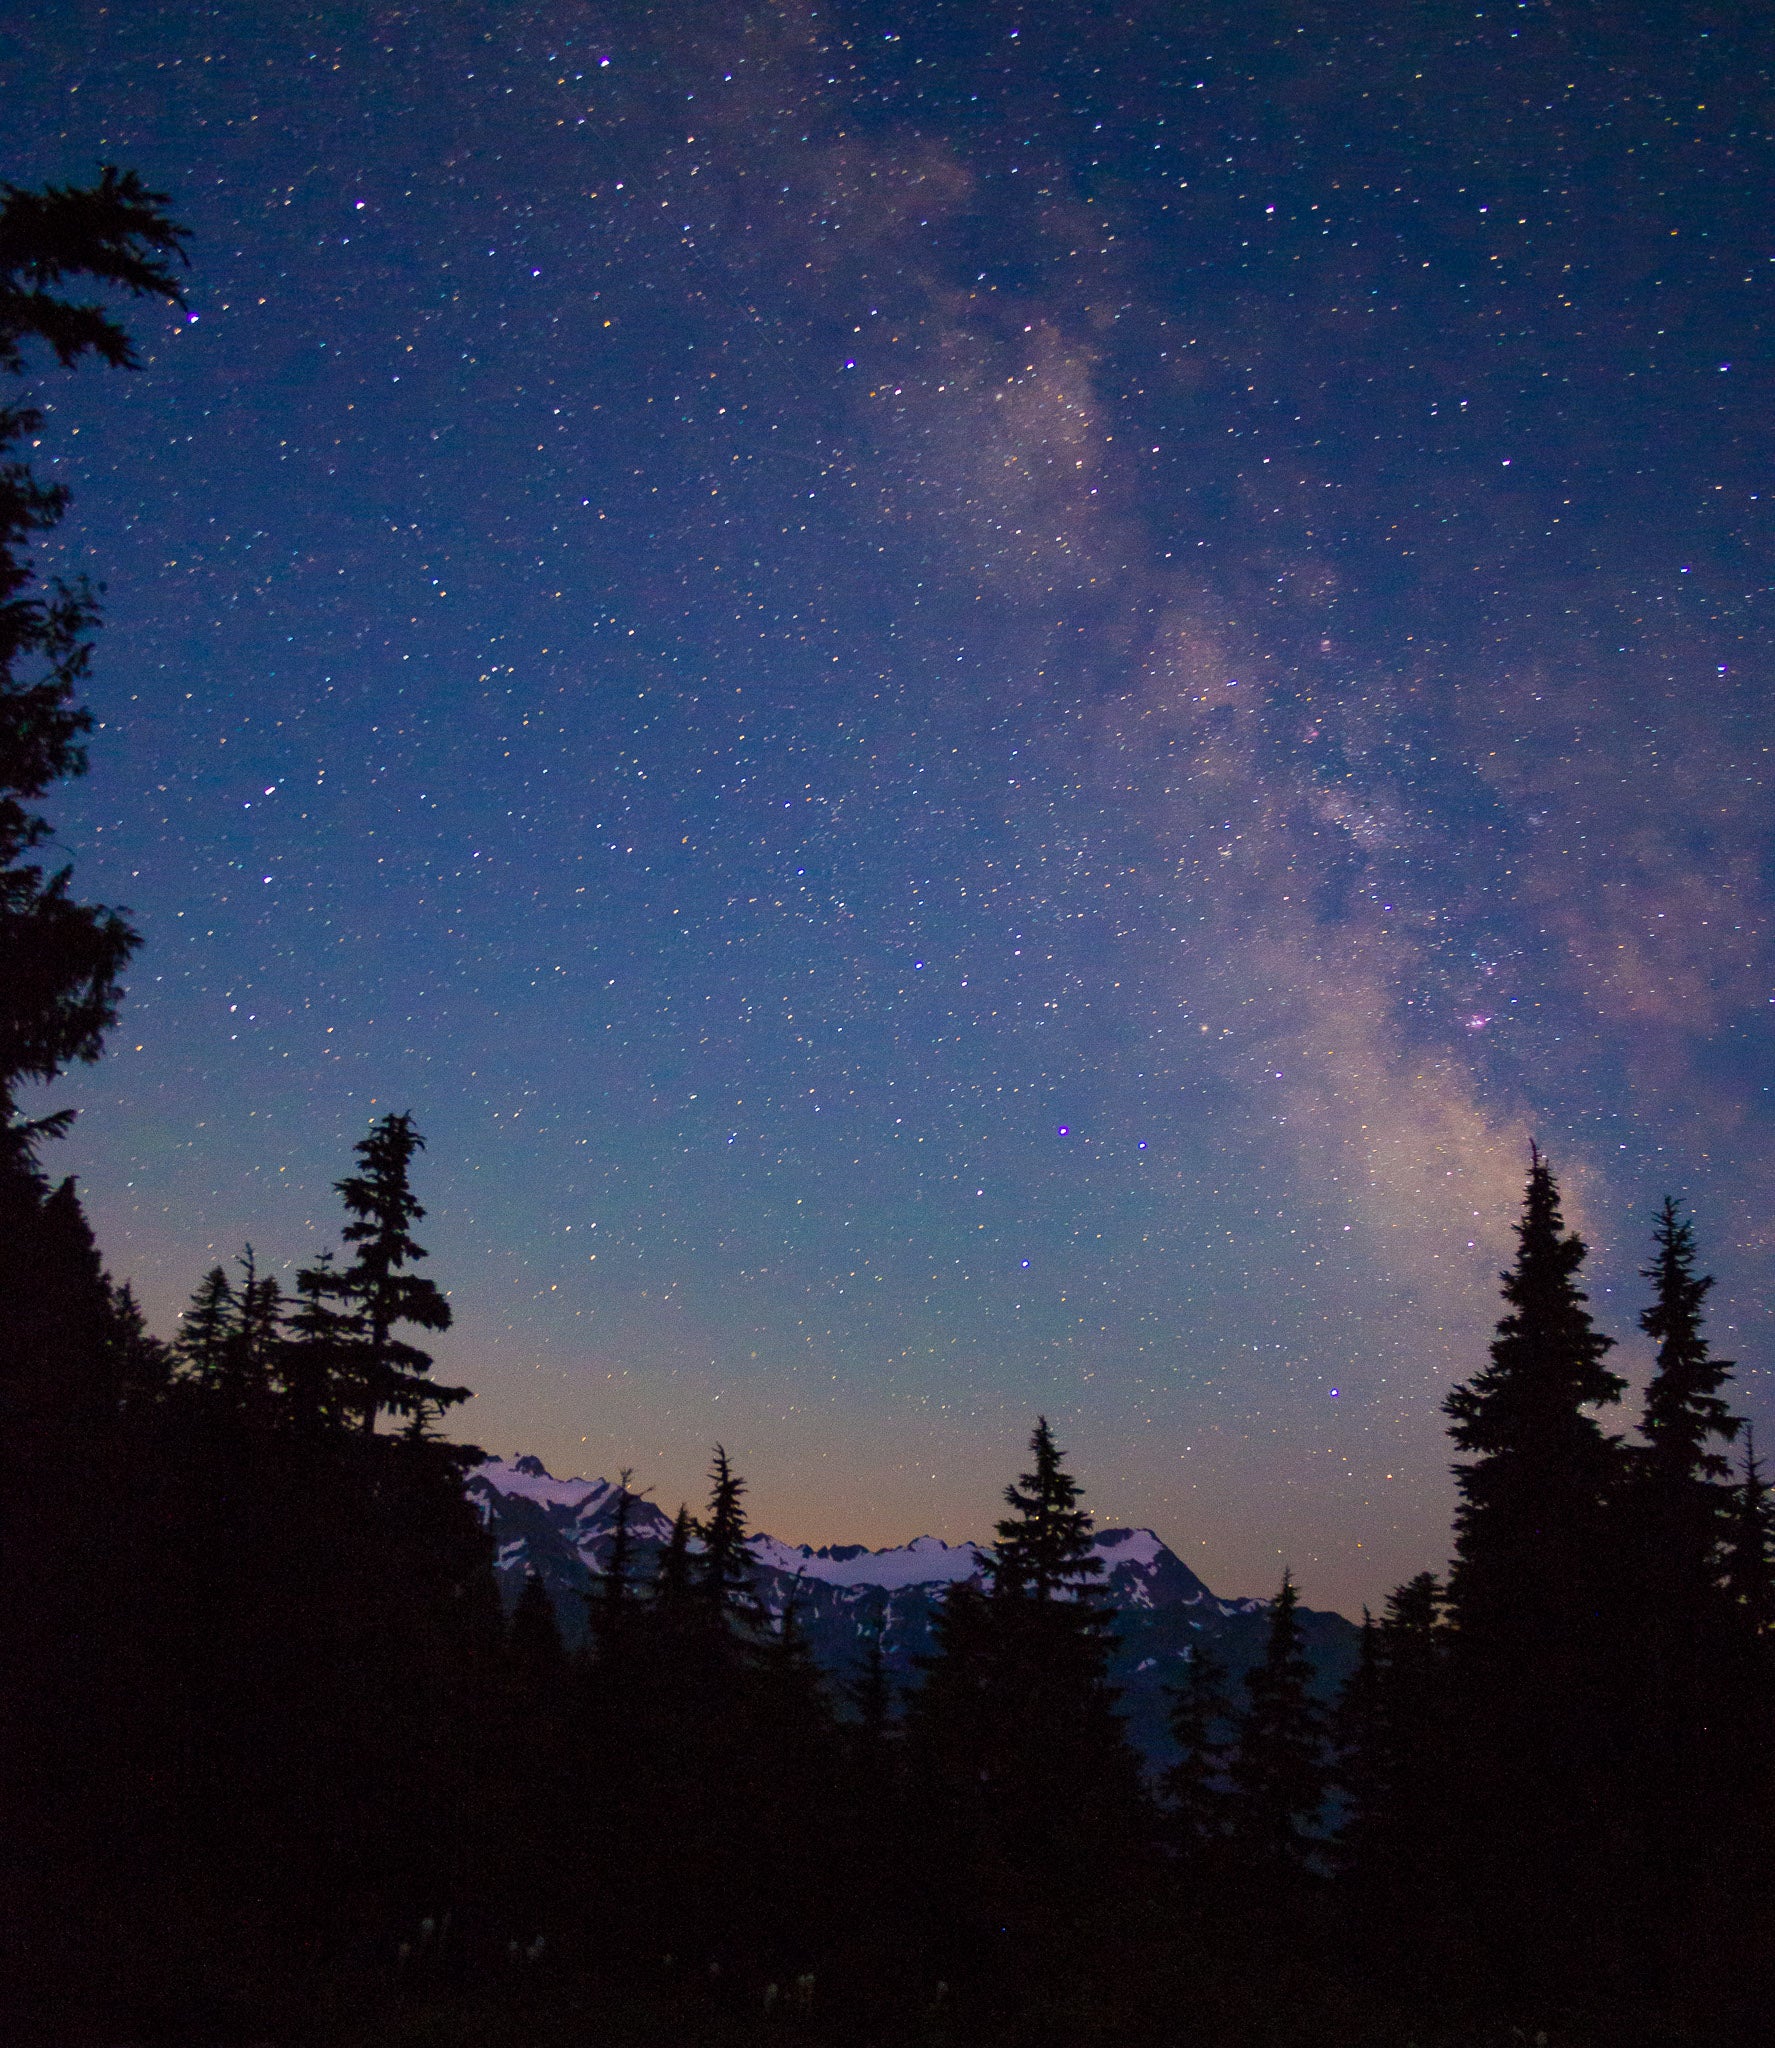 The milky way above Mt. Olympus